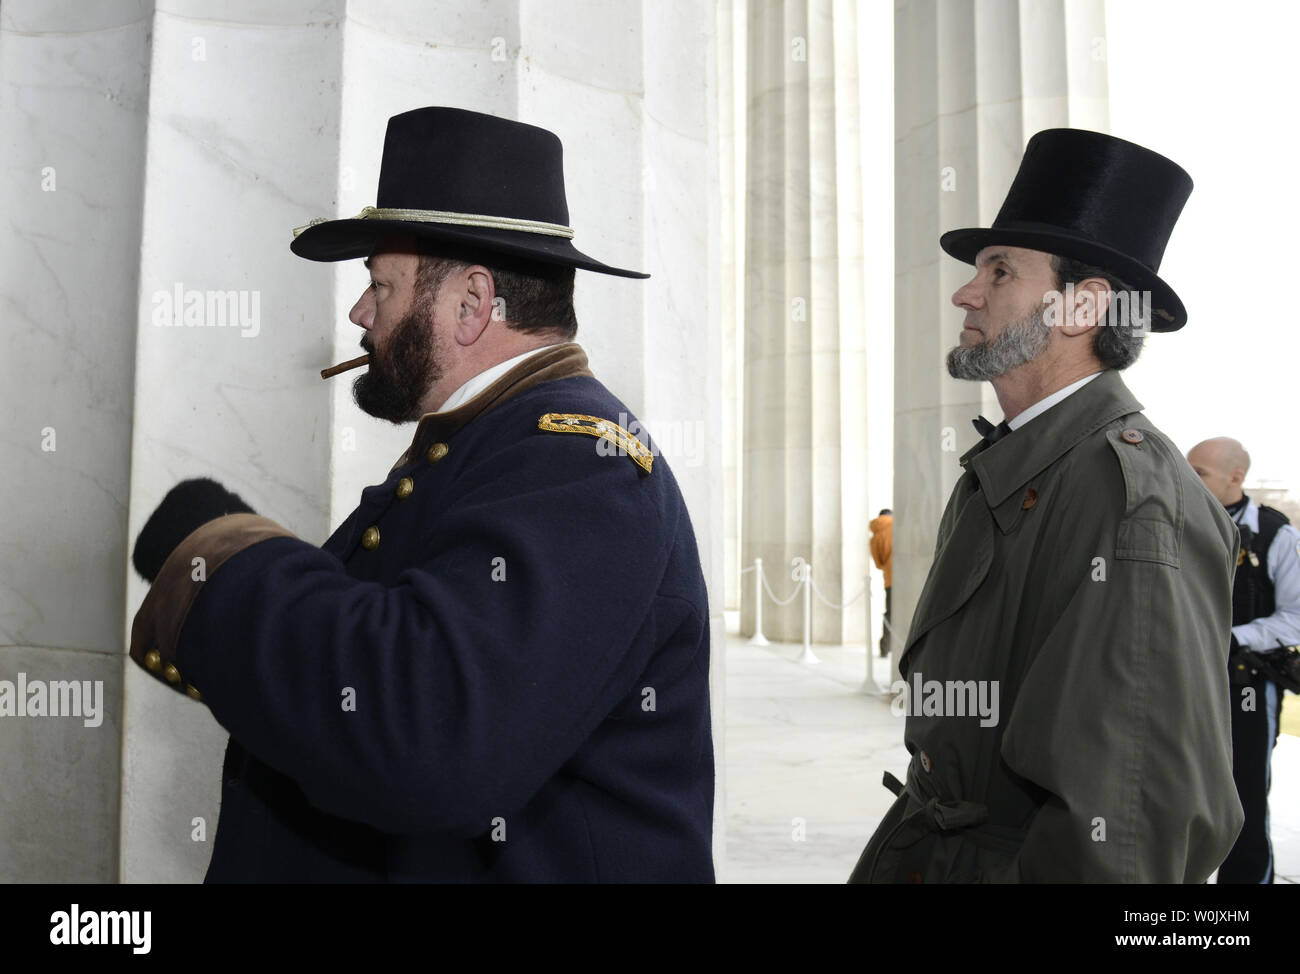 US President Abraham Lincoln re-enactor Greg Edwards (R) and Gen. Ulysses S. Grant re-enactor Kenneth Serfass attend a National Park Service-hosted event to mark the 209th anniversary of Lincoln's birthday, February 12, 2018, at the Lincoln Memorial, in Washington, D.C. Considered one of America's greatest presidents, Lincoln is remembered for preserving the Union after the Civil War and freeing slaves with the Emancipation Proclamation.       Photo by Mike Theiler/UPI Stock Photo